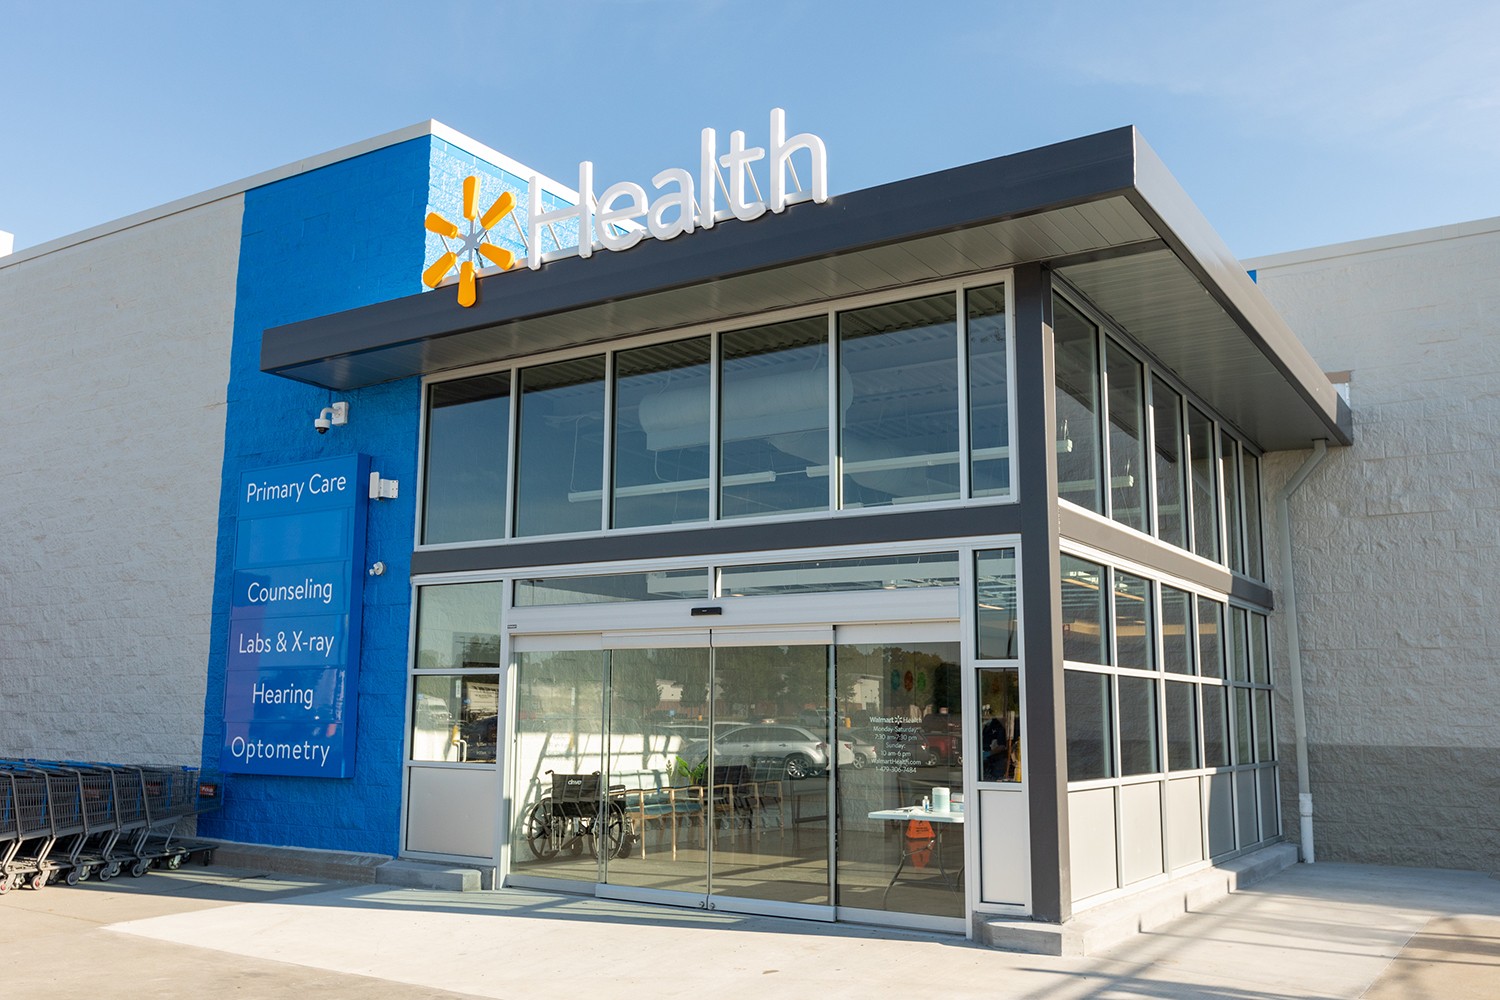 New Walmart Health Brings Affordable and Accessible Healthcare to